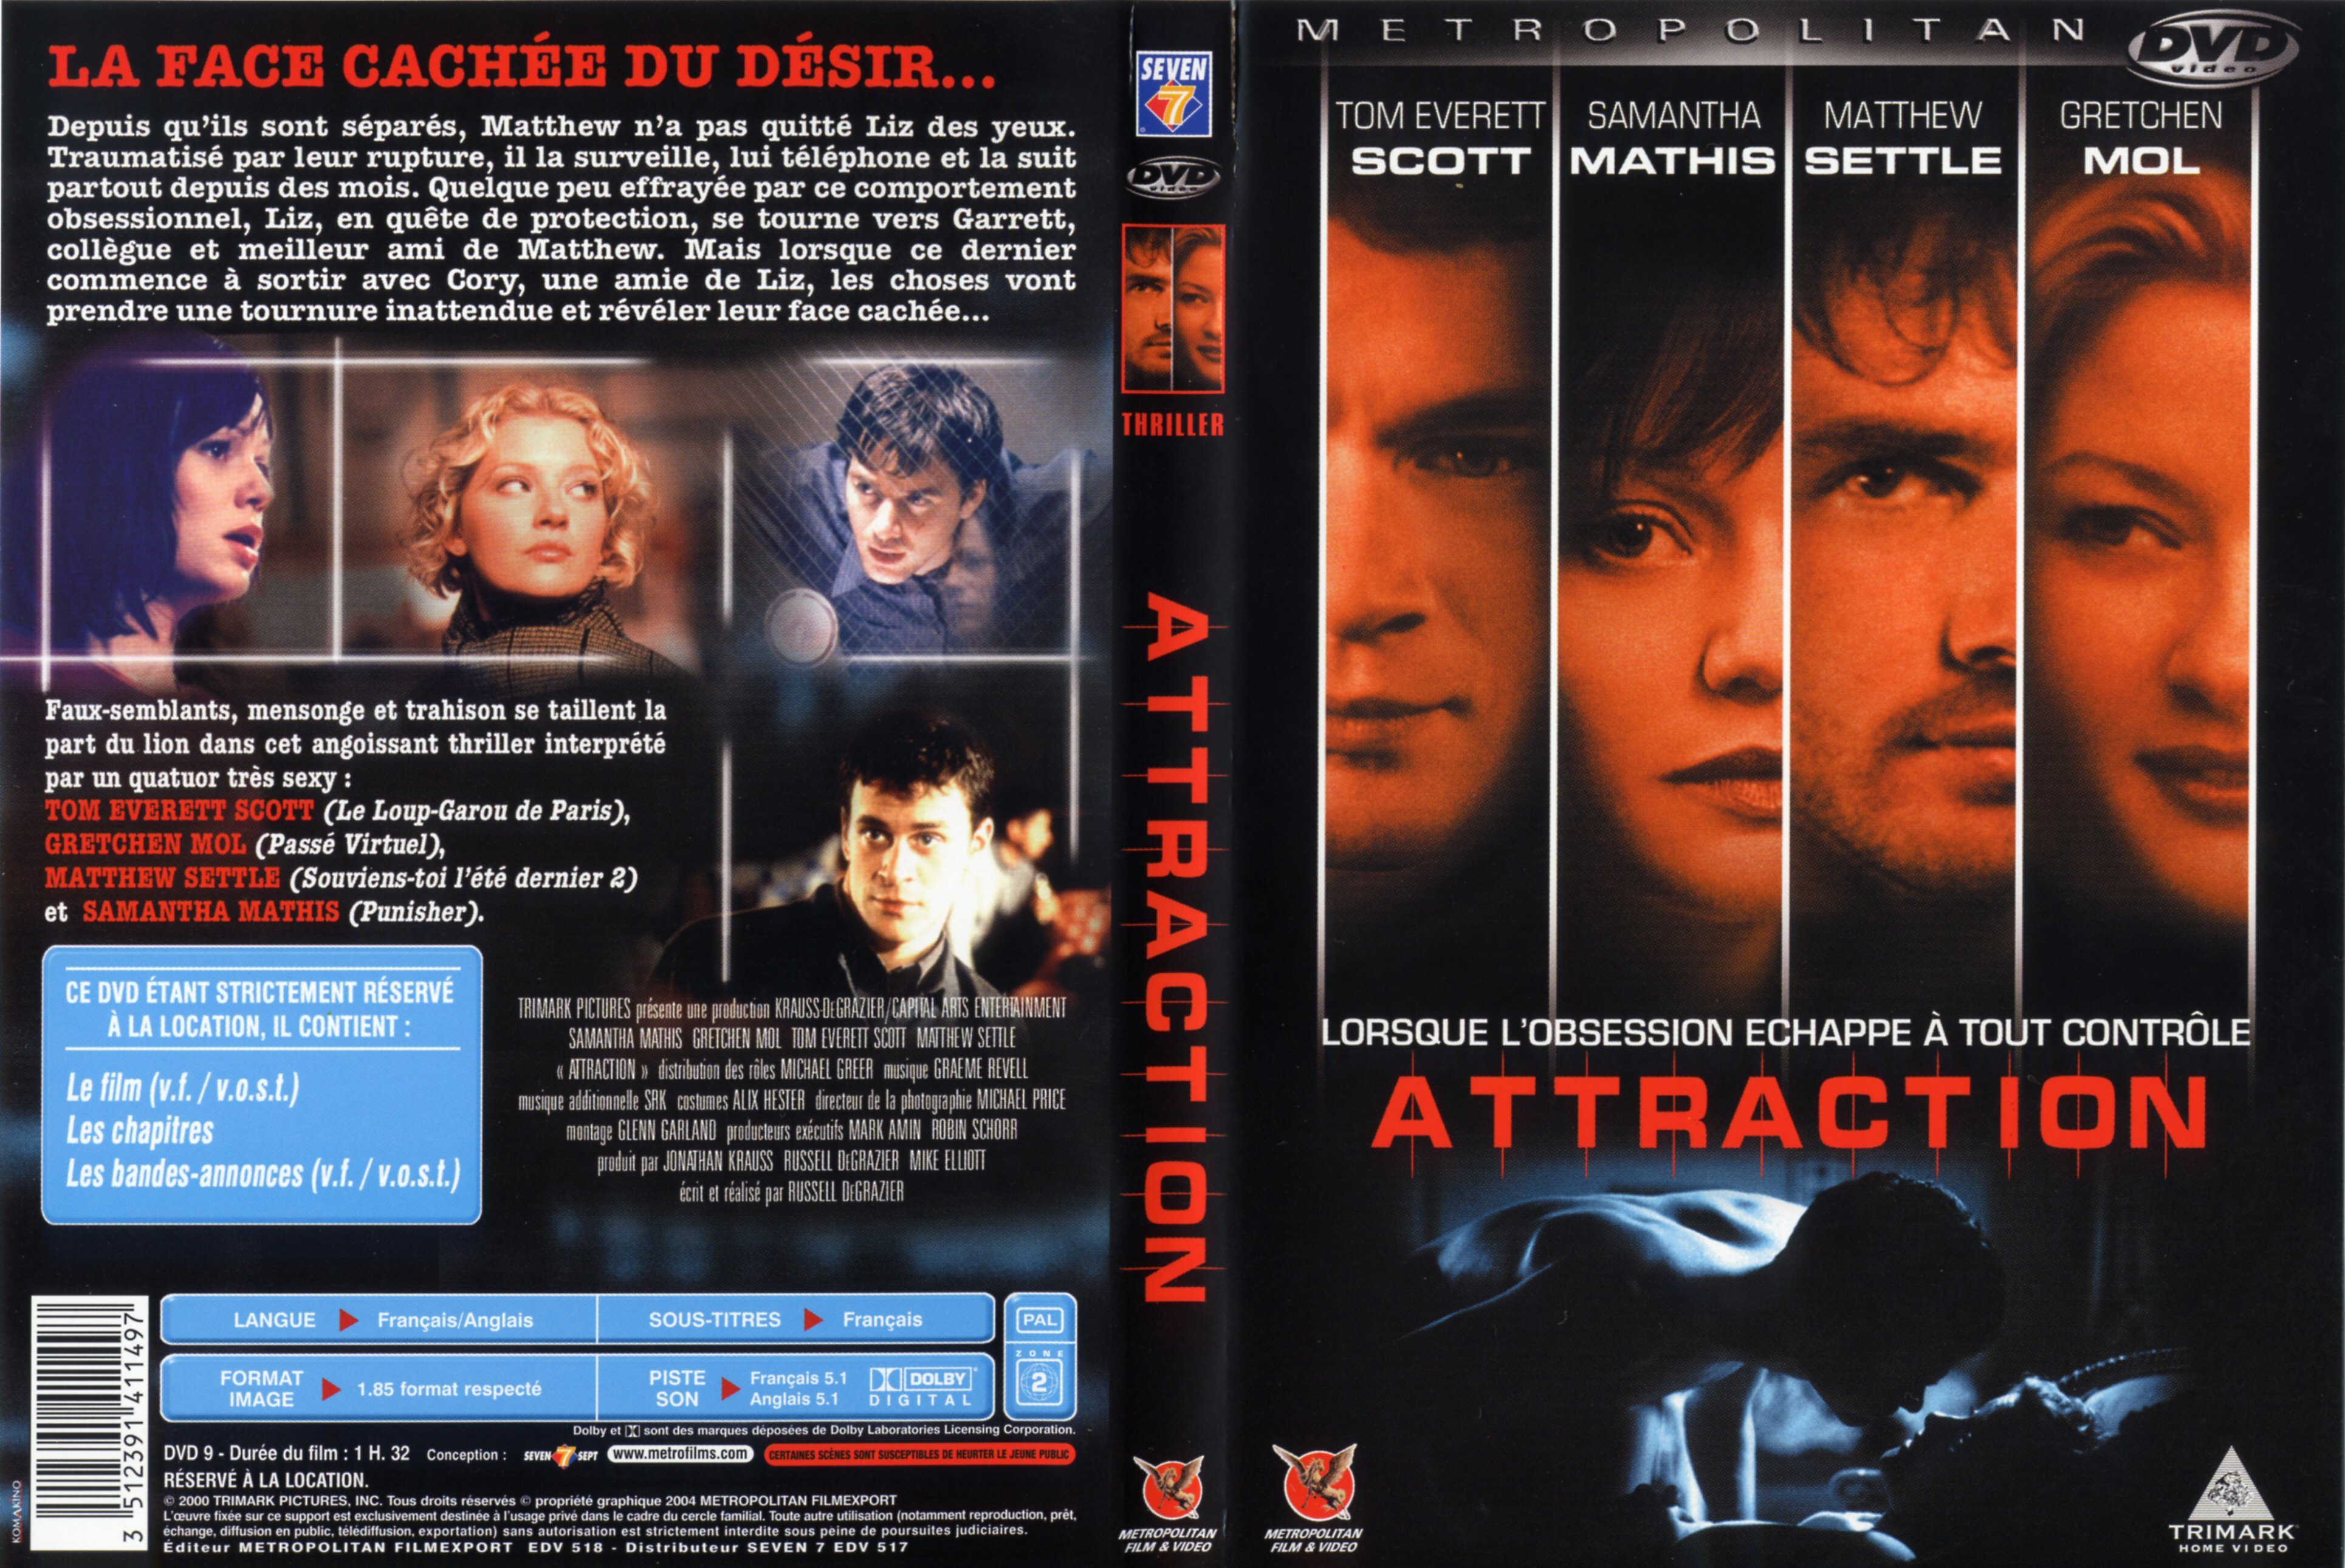 Jaquette DVD Attraction